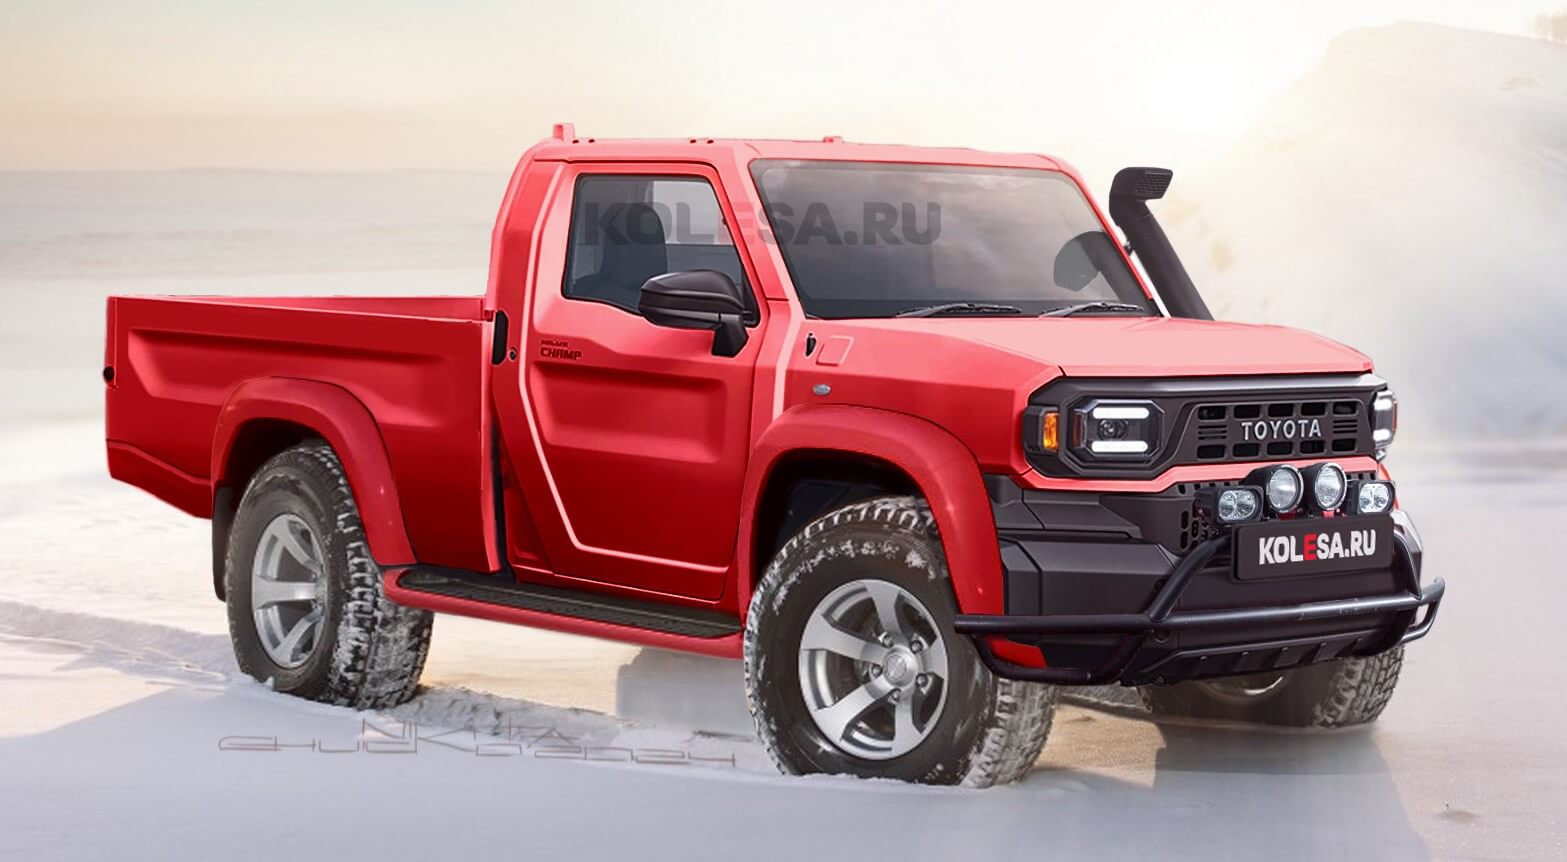 Toyota Hilux Champ 2024 shown in Arctic Trucks style